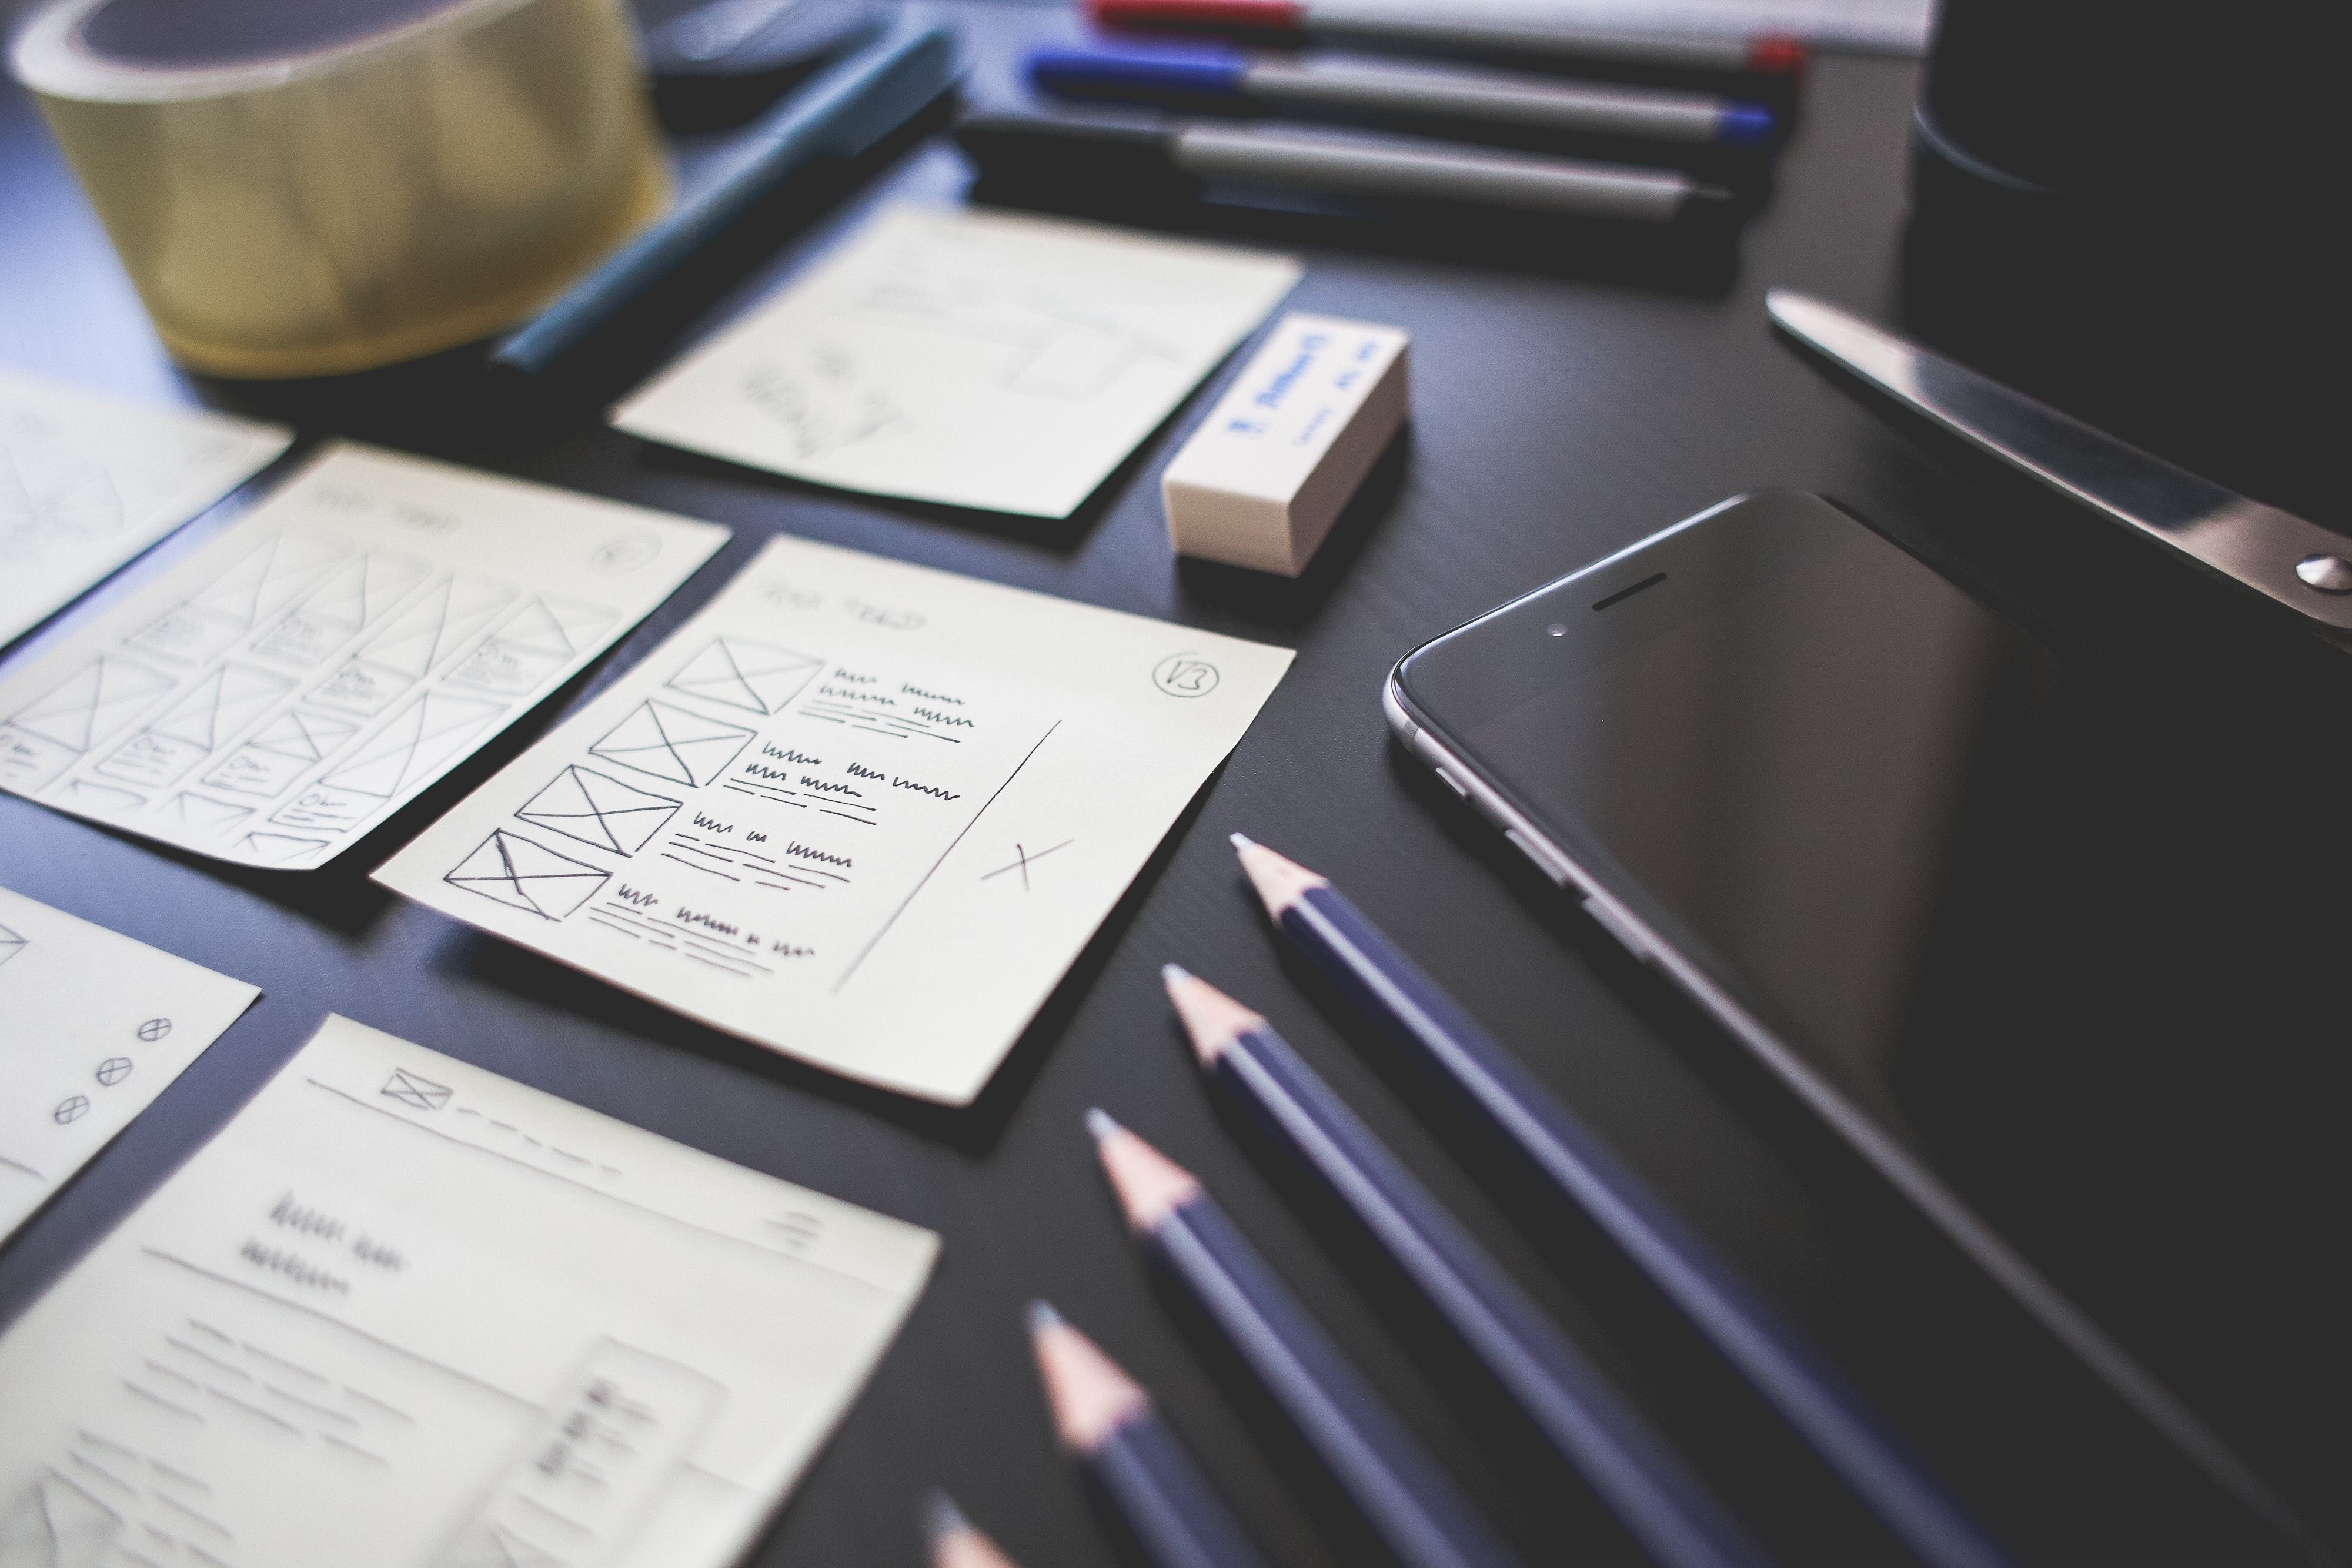 Pencils and website wireframes on a desk.